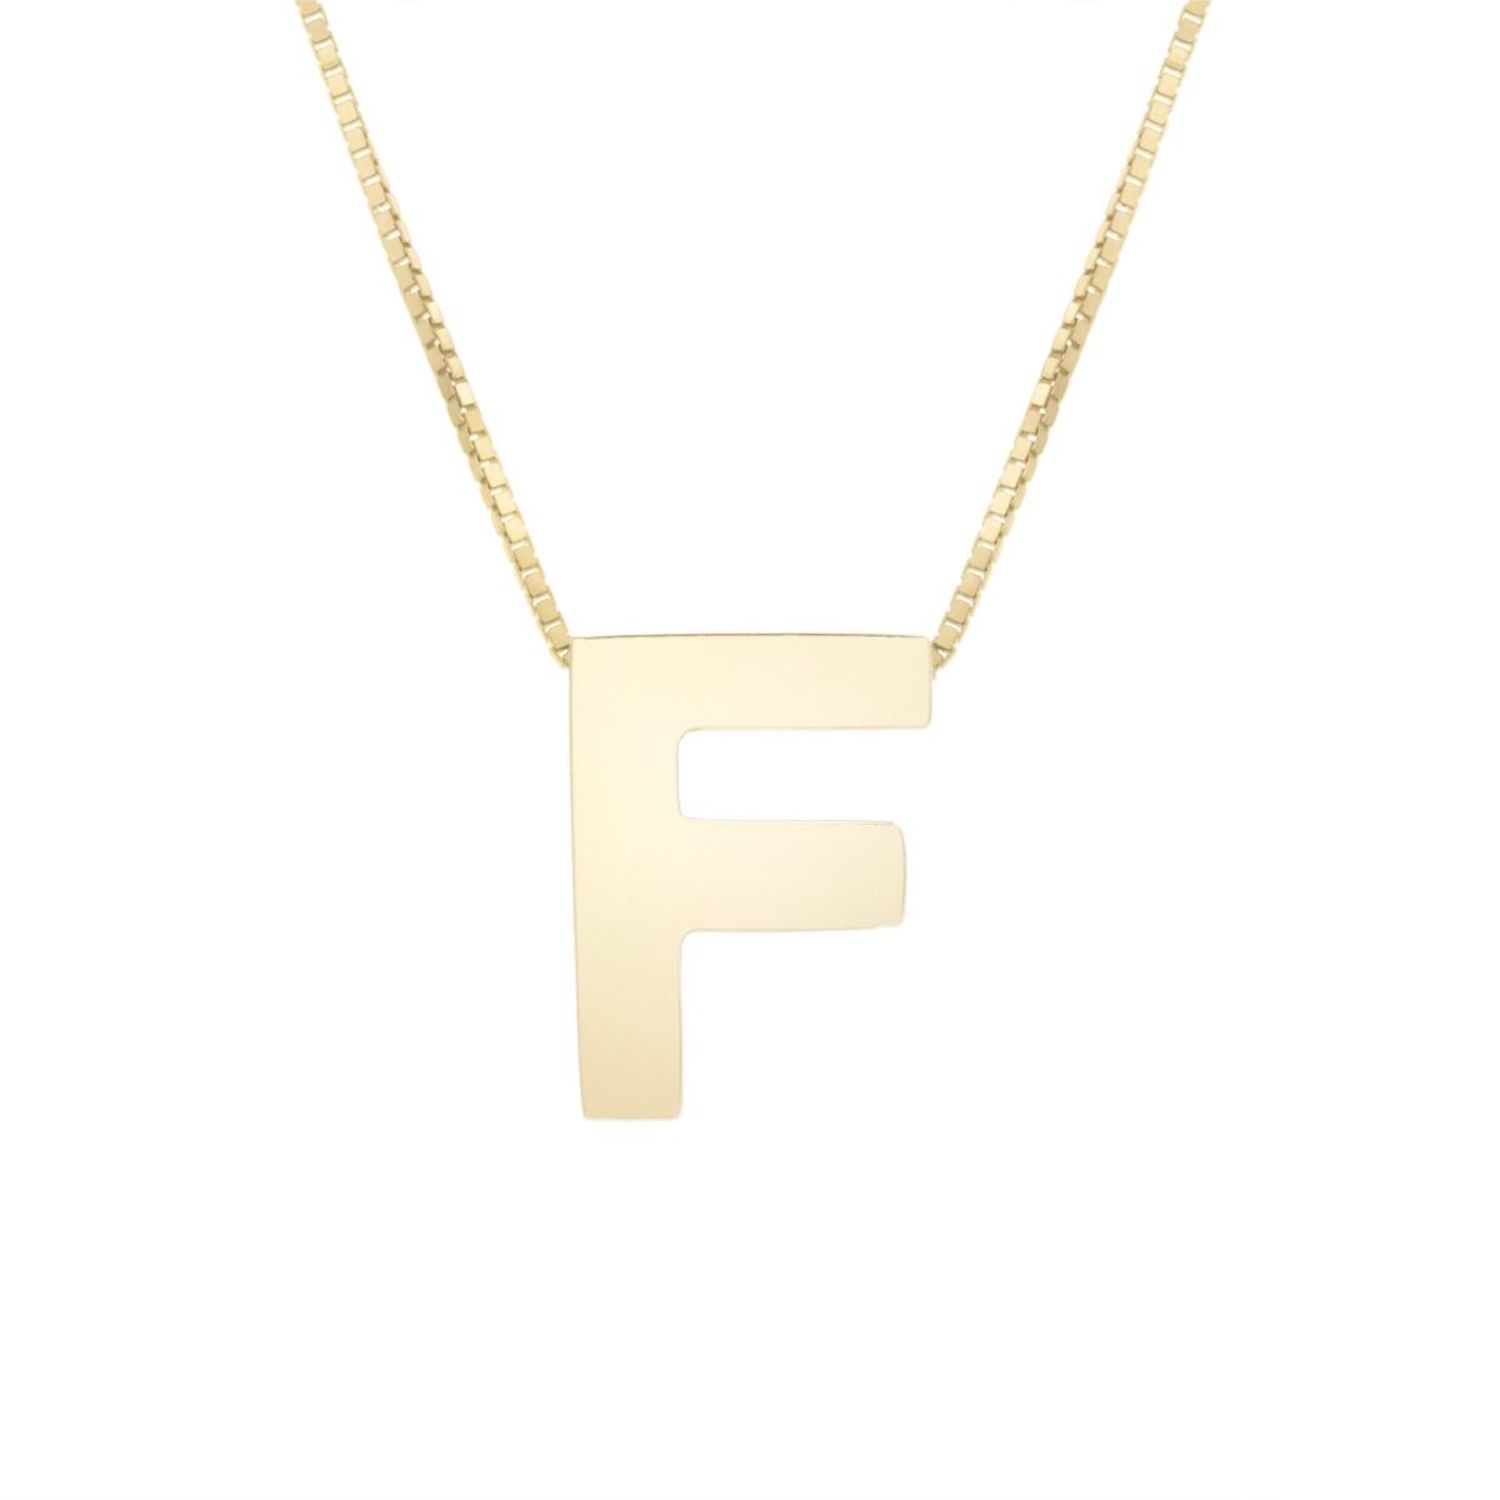 14K Yellow Gold Block Letter Initial Pendant Box Chain Necklace 16"-18" - F